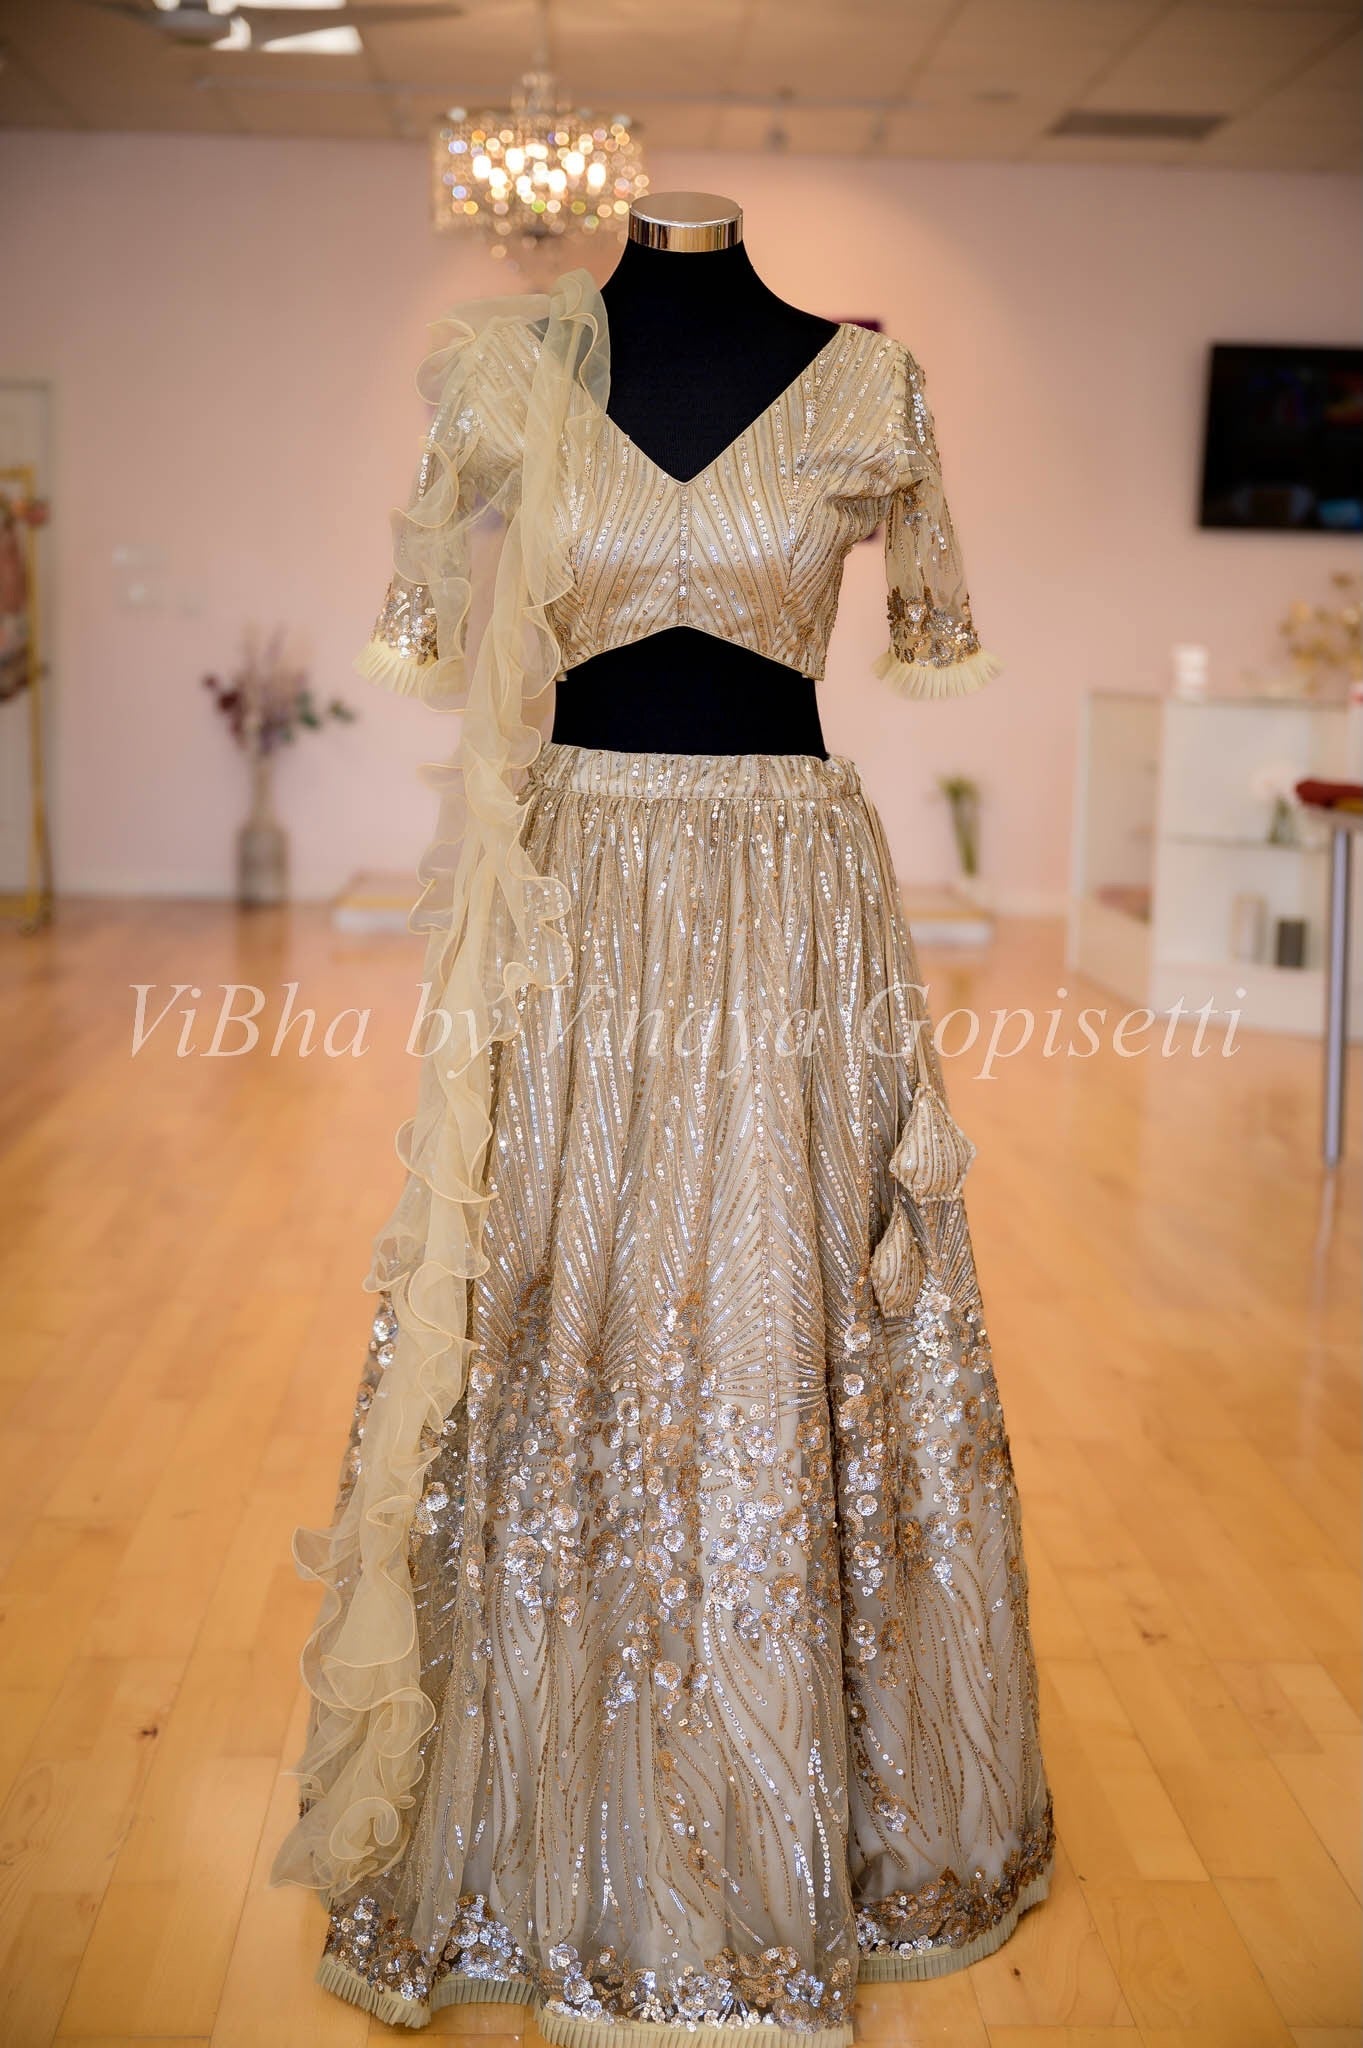 Pin on Salwars Suits Lehengas and More